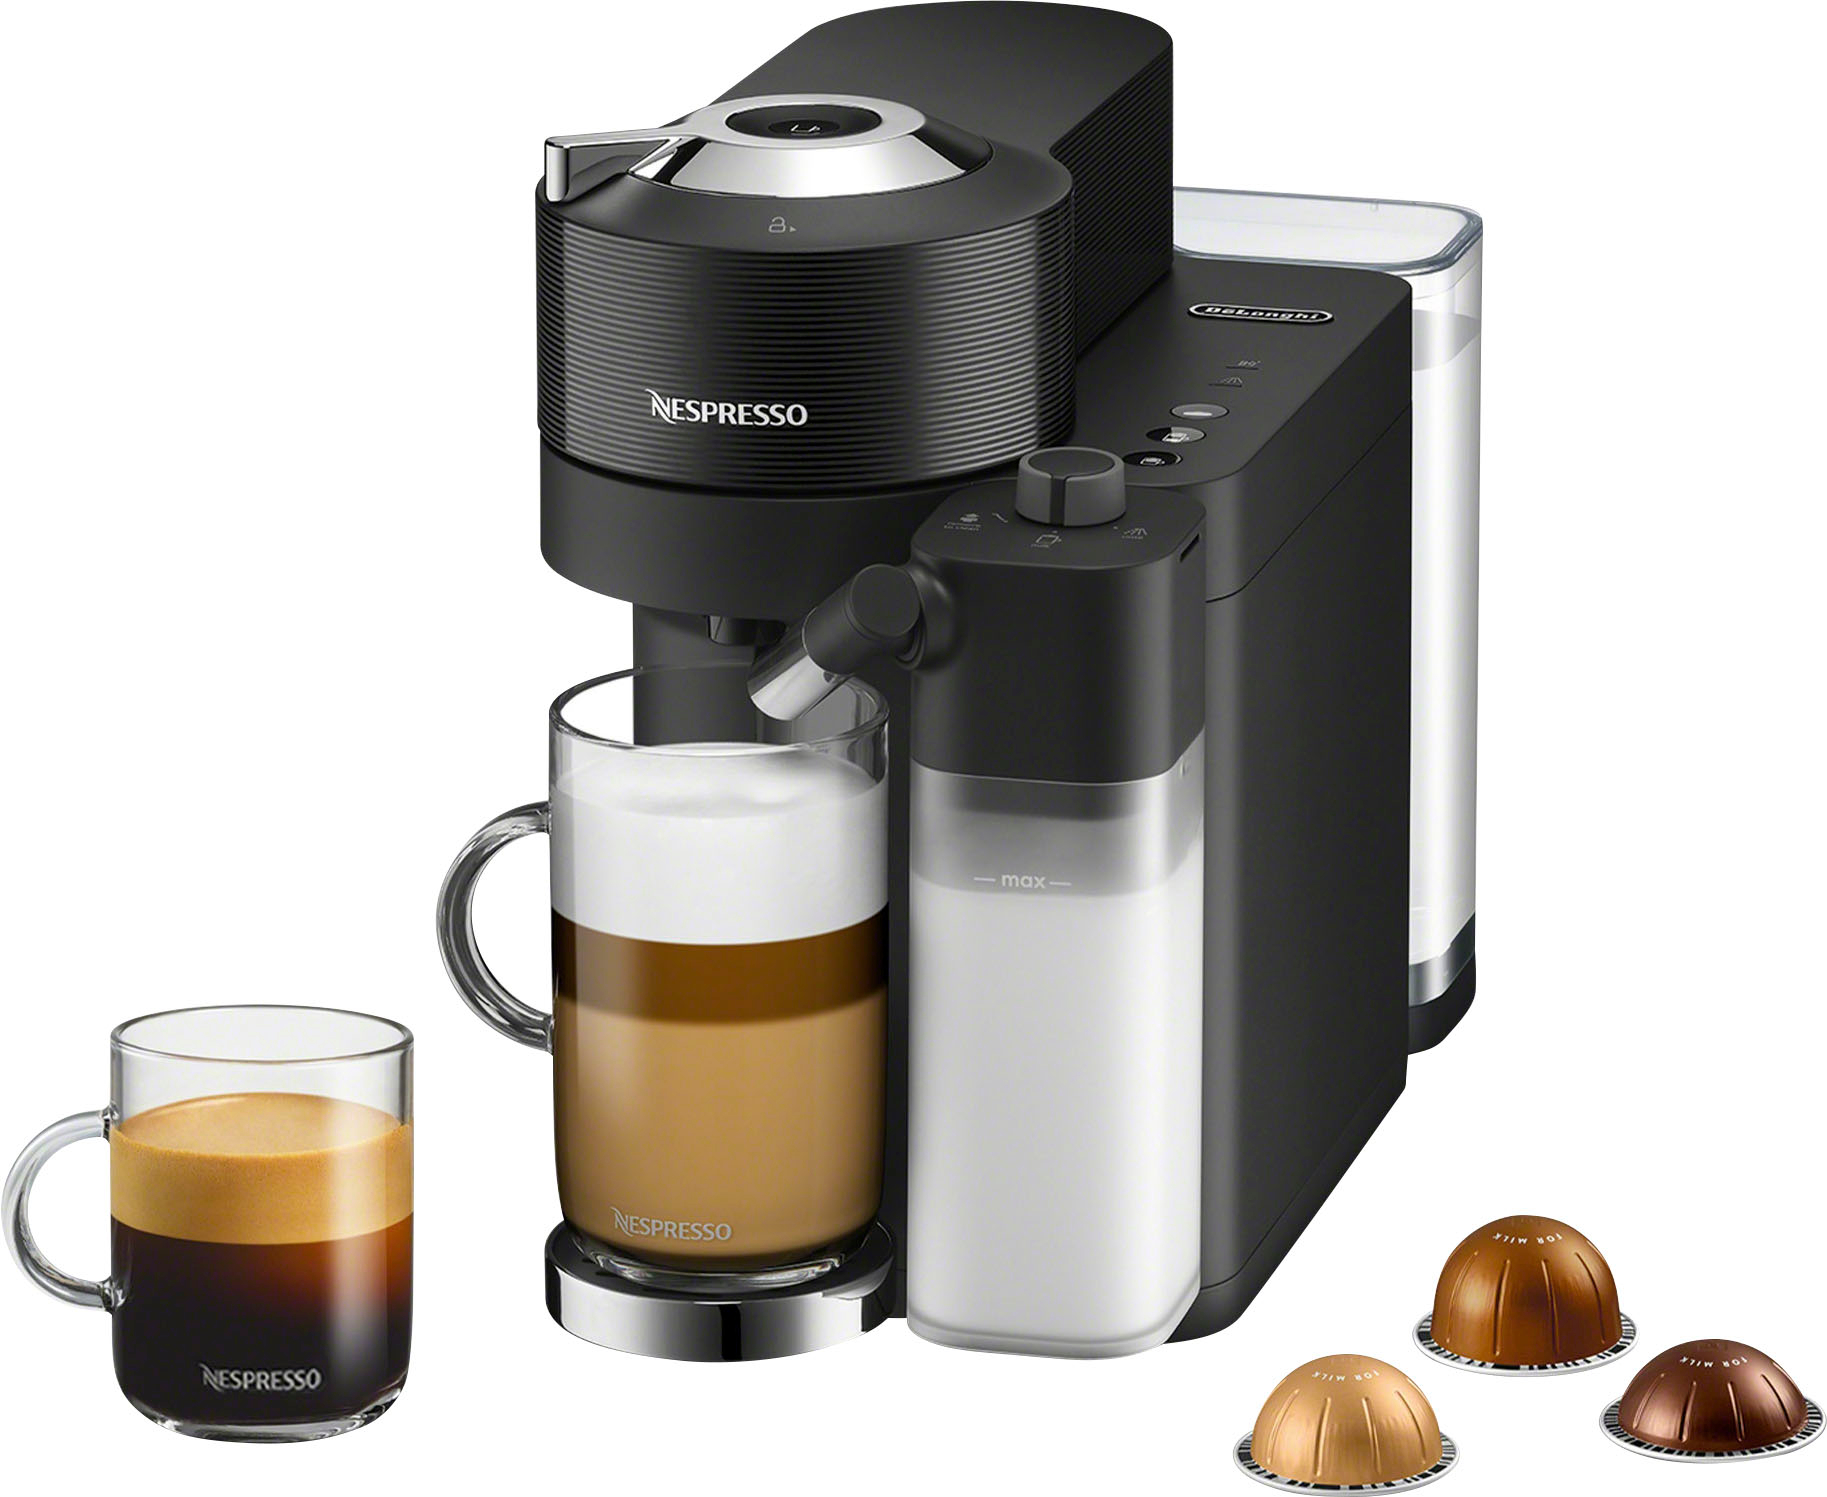 Nespresso - There's a Nespresso mug out there for